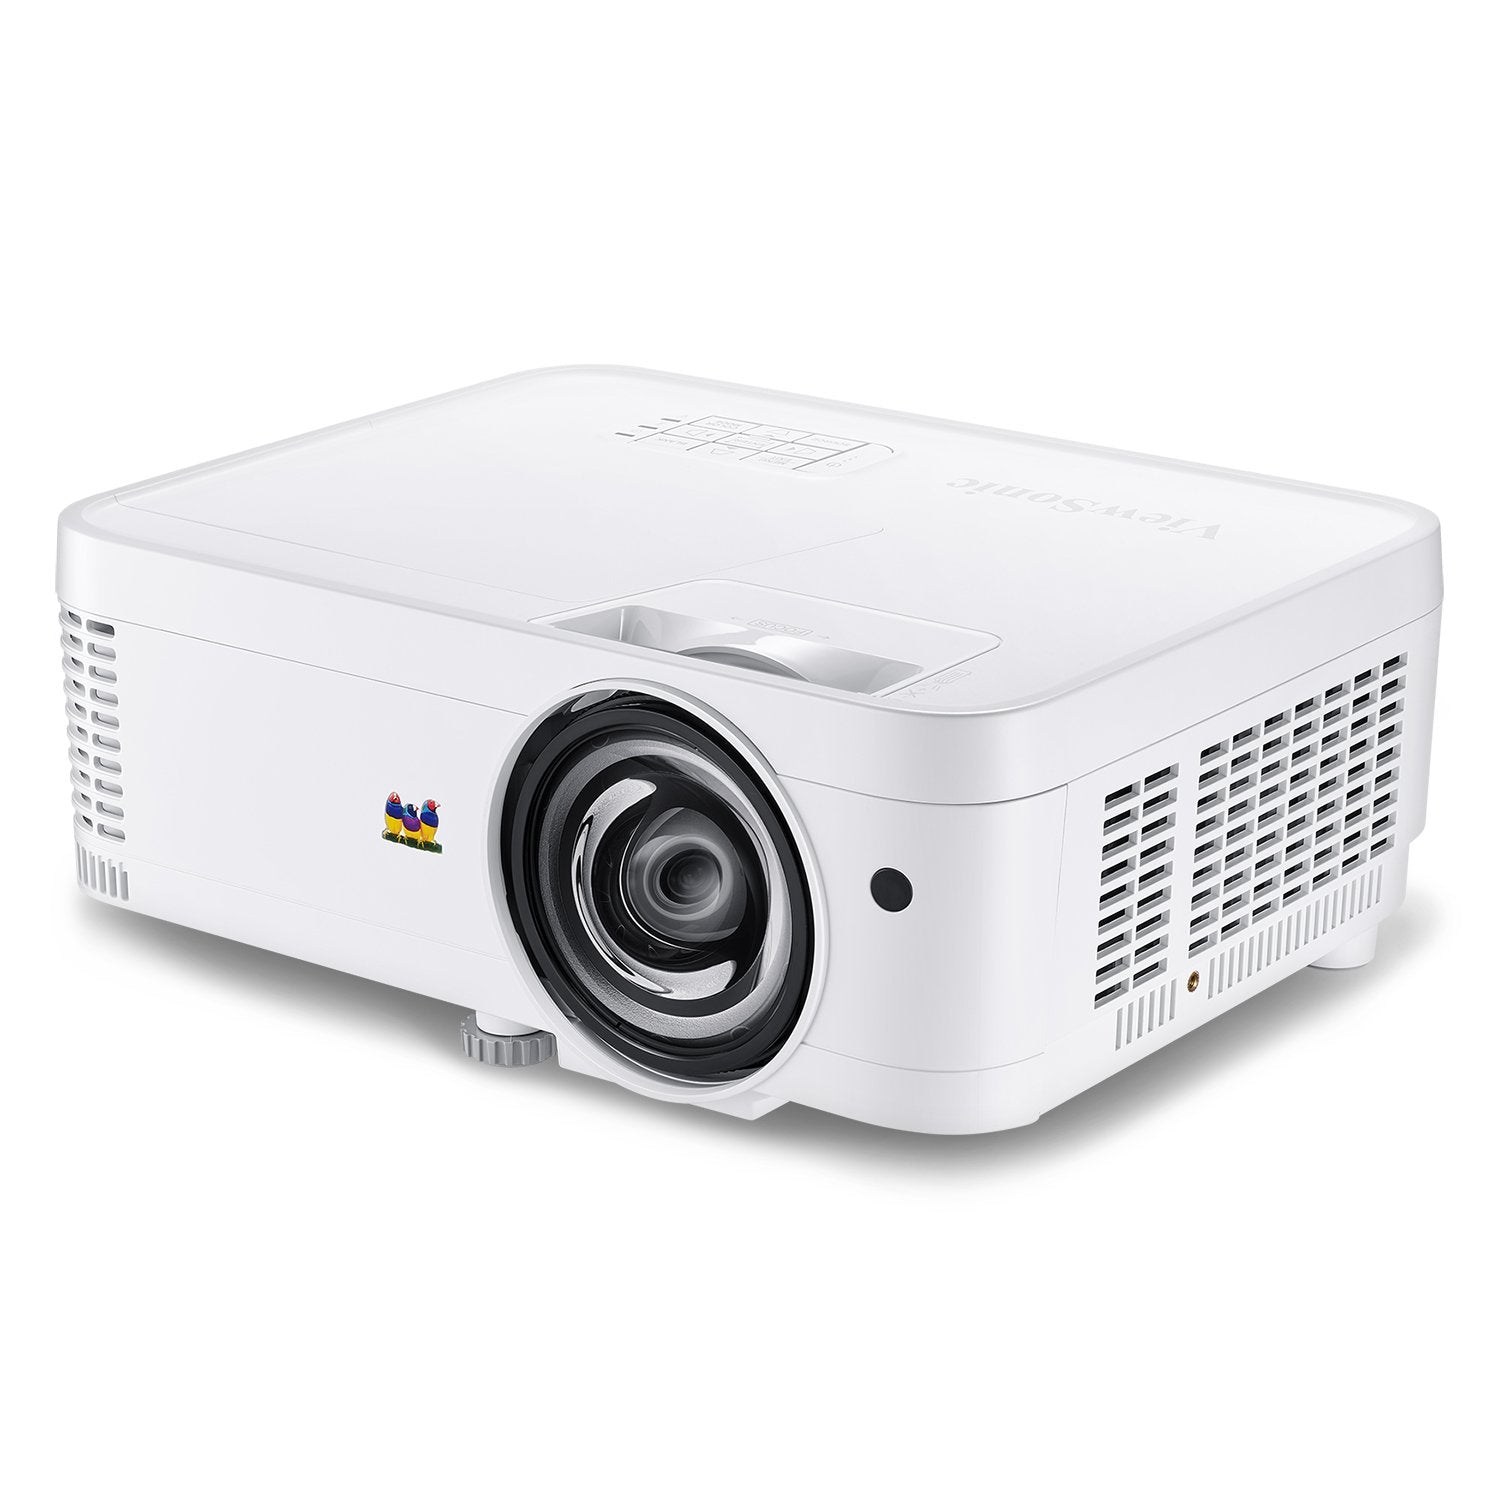 ViewSonic PS600X-S 3500 Lumens XGA HDMI Networkable Short Throw for Home and Office Projector Certified Refurbished